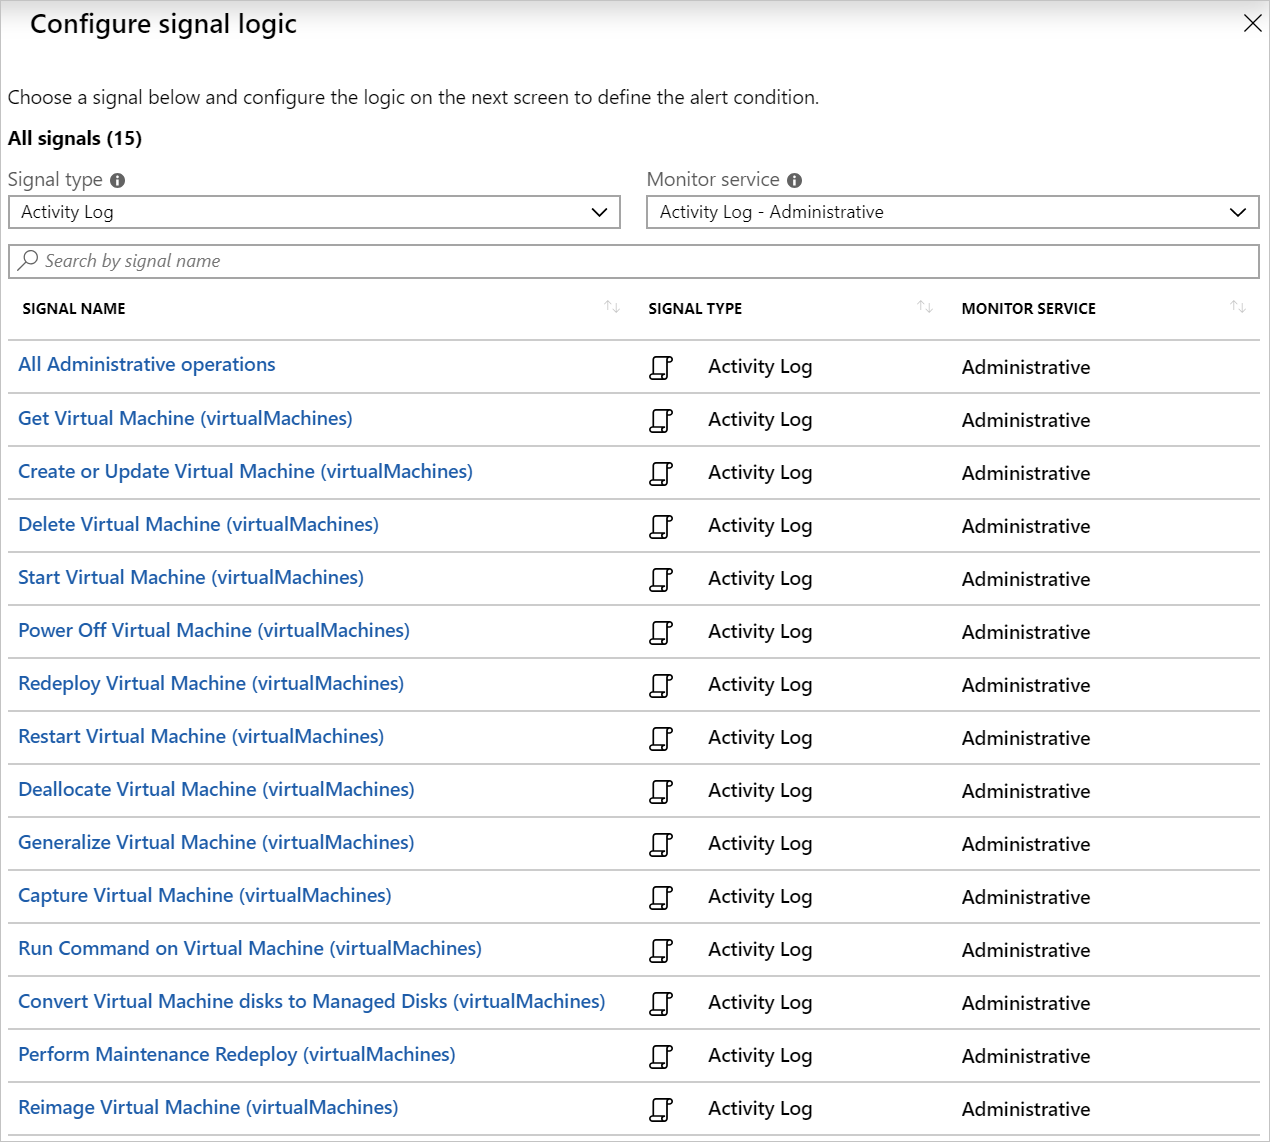 Screenshot of the signal logic for activity log alerts related to VMs.